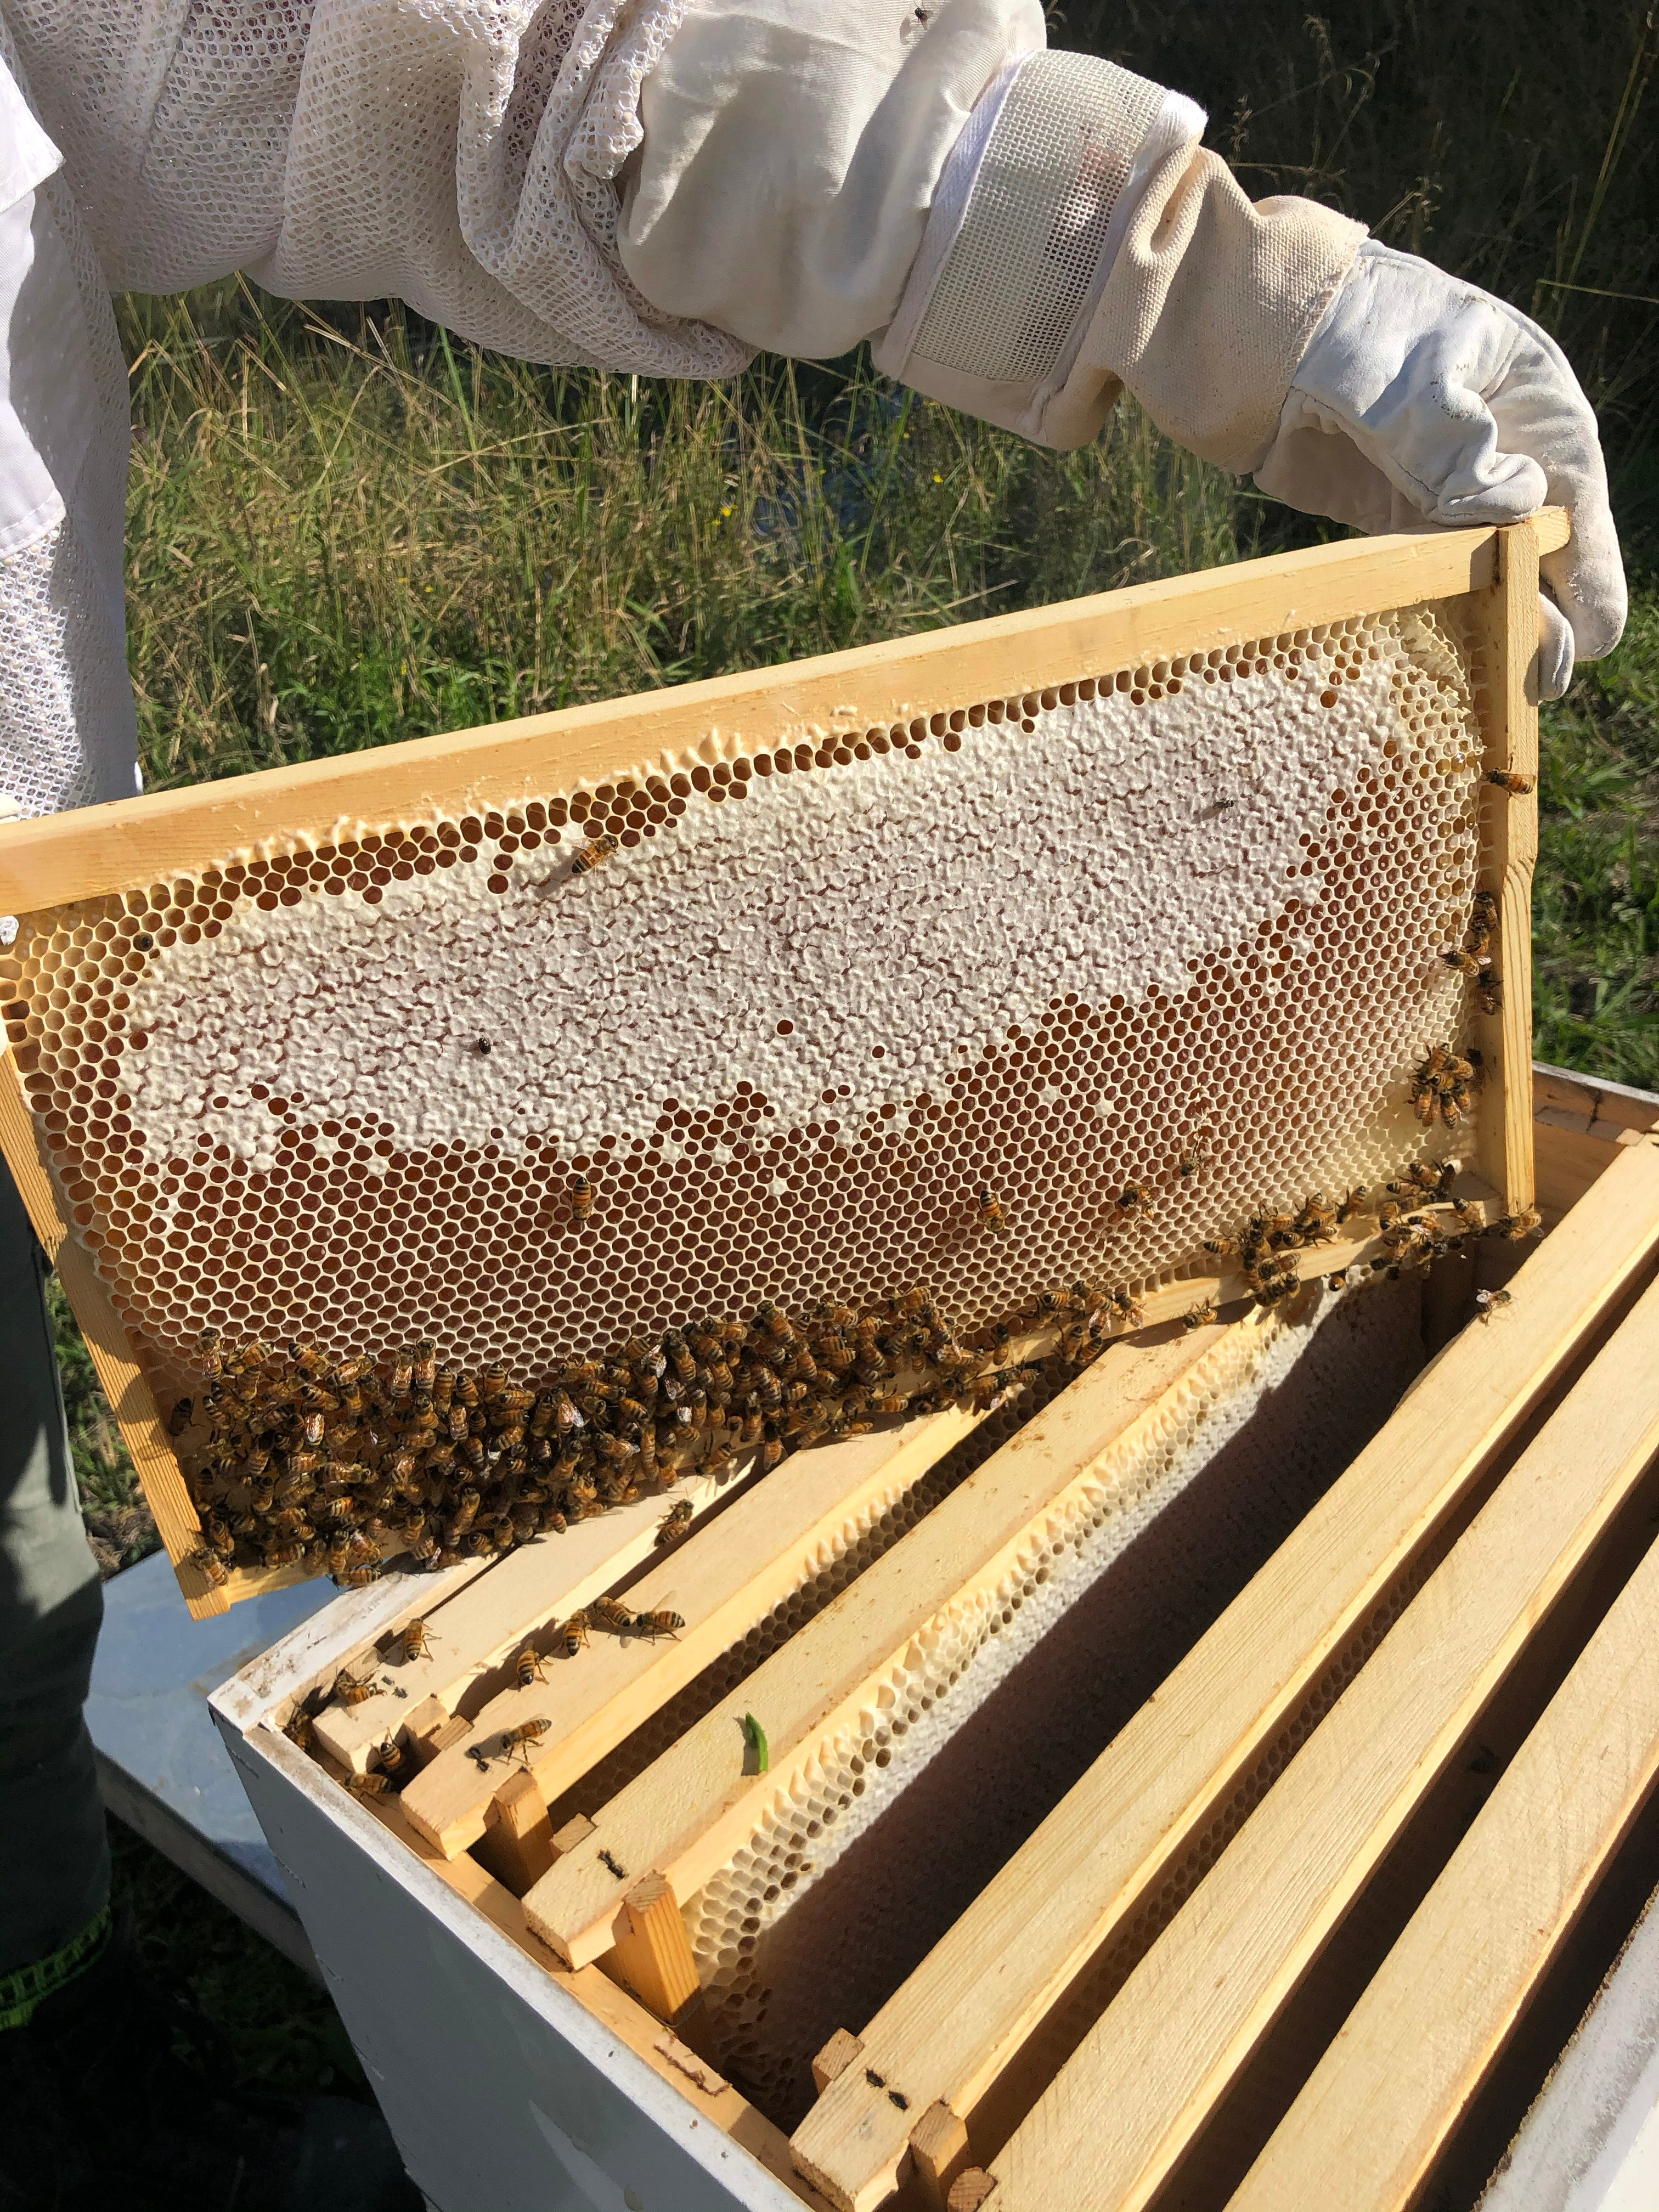 Learn About The Natural Flow Of Honey Production At Freshwater Farm 🍯🐝 - FreshwaterFarm